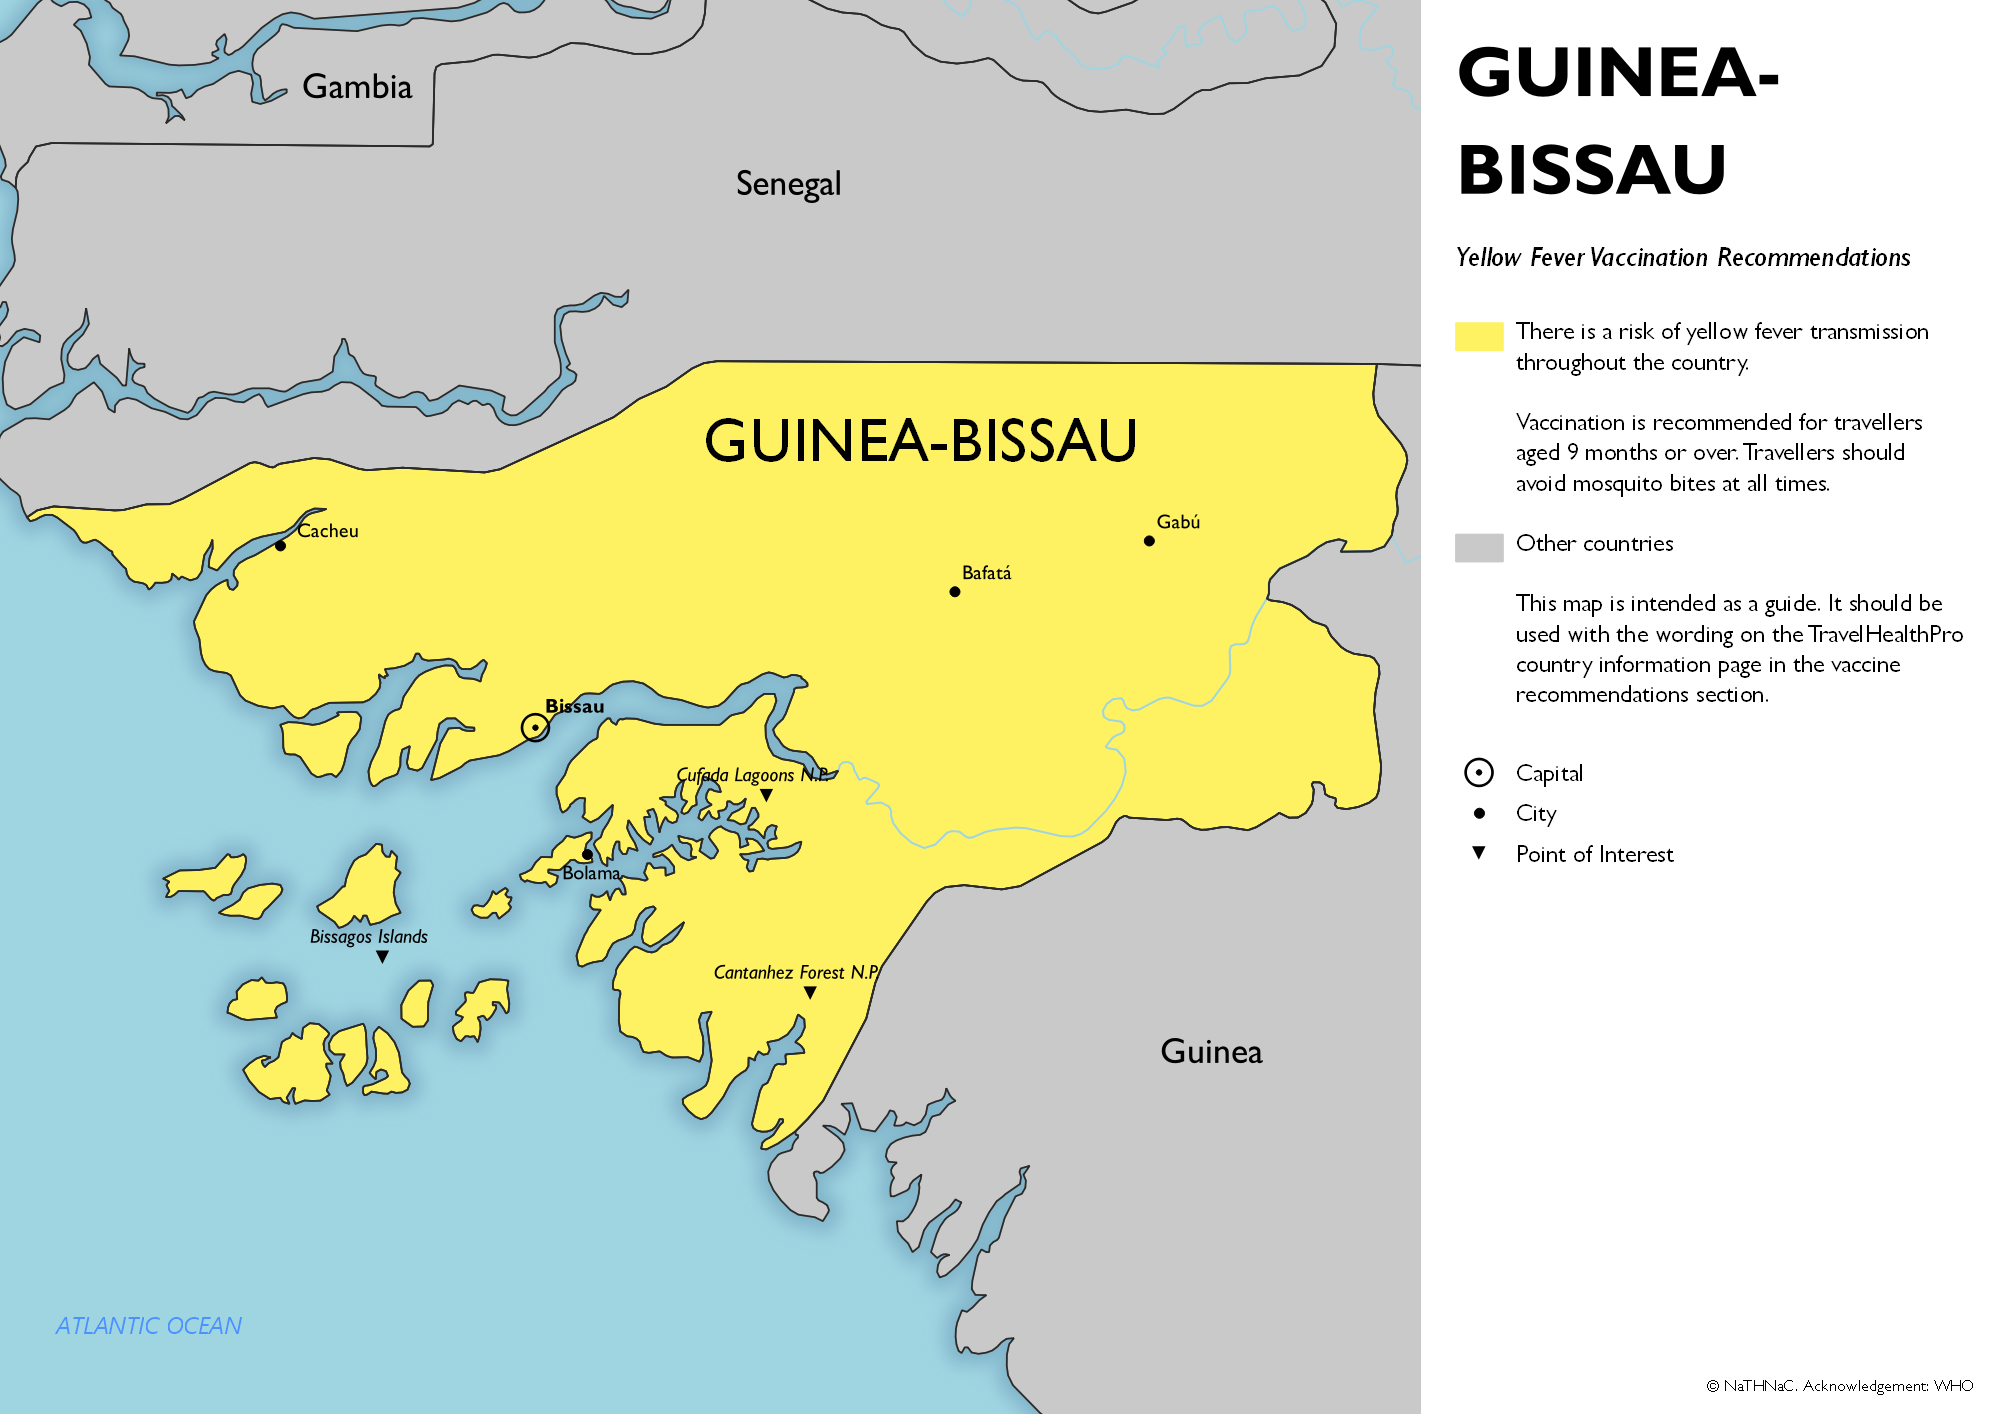 Yellow fever vaccine recommendation map for Guinea-Bissau